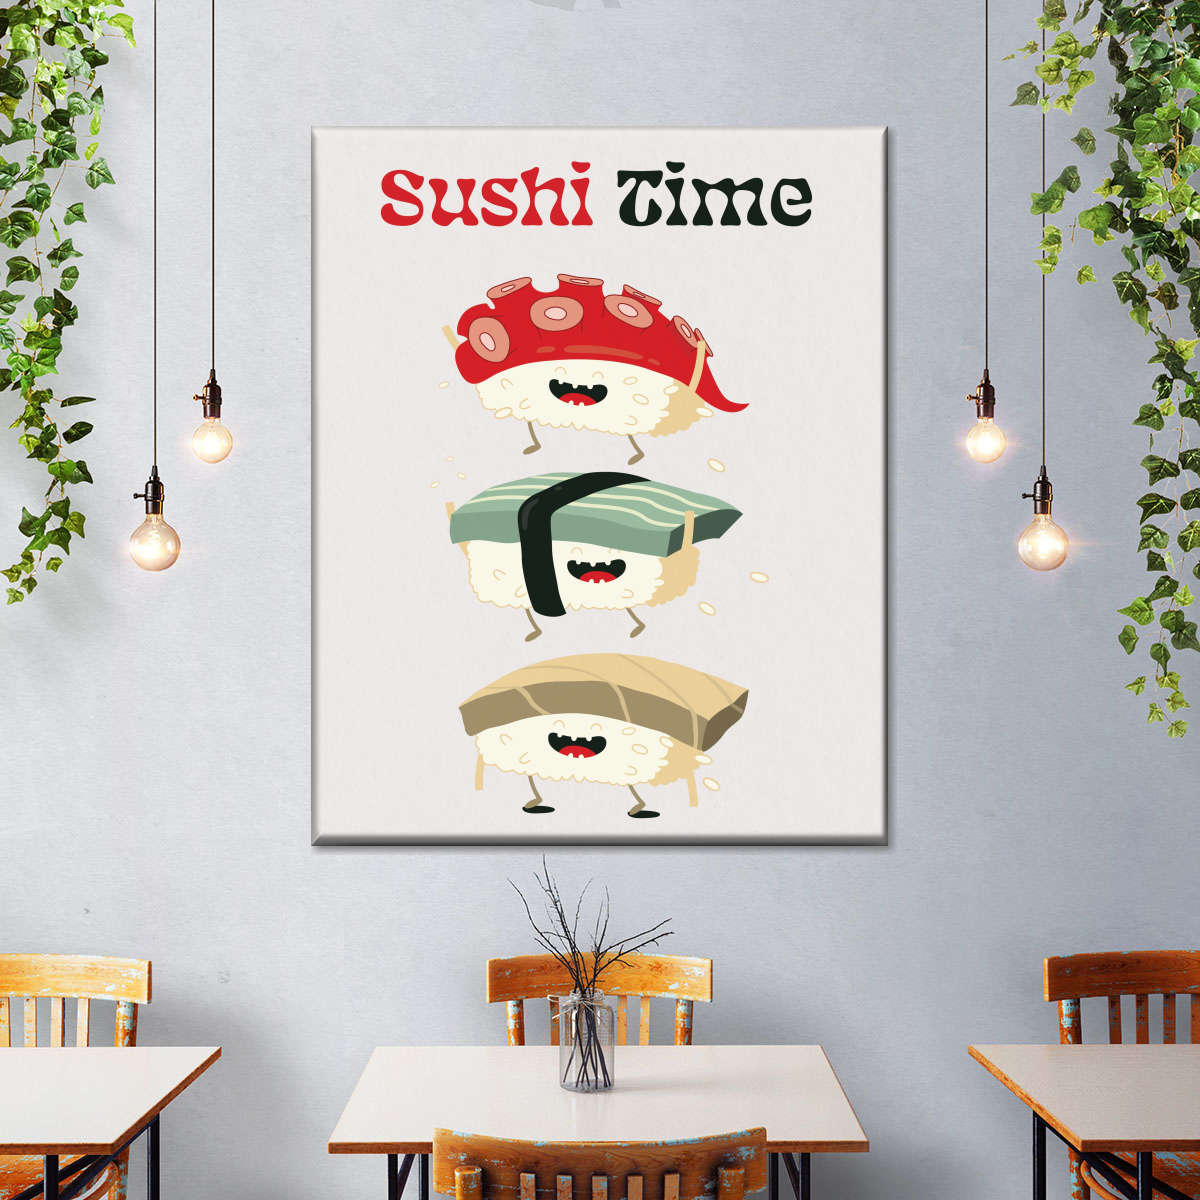 Sushi Time Art: Canvas Prints, Frames  Posters